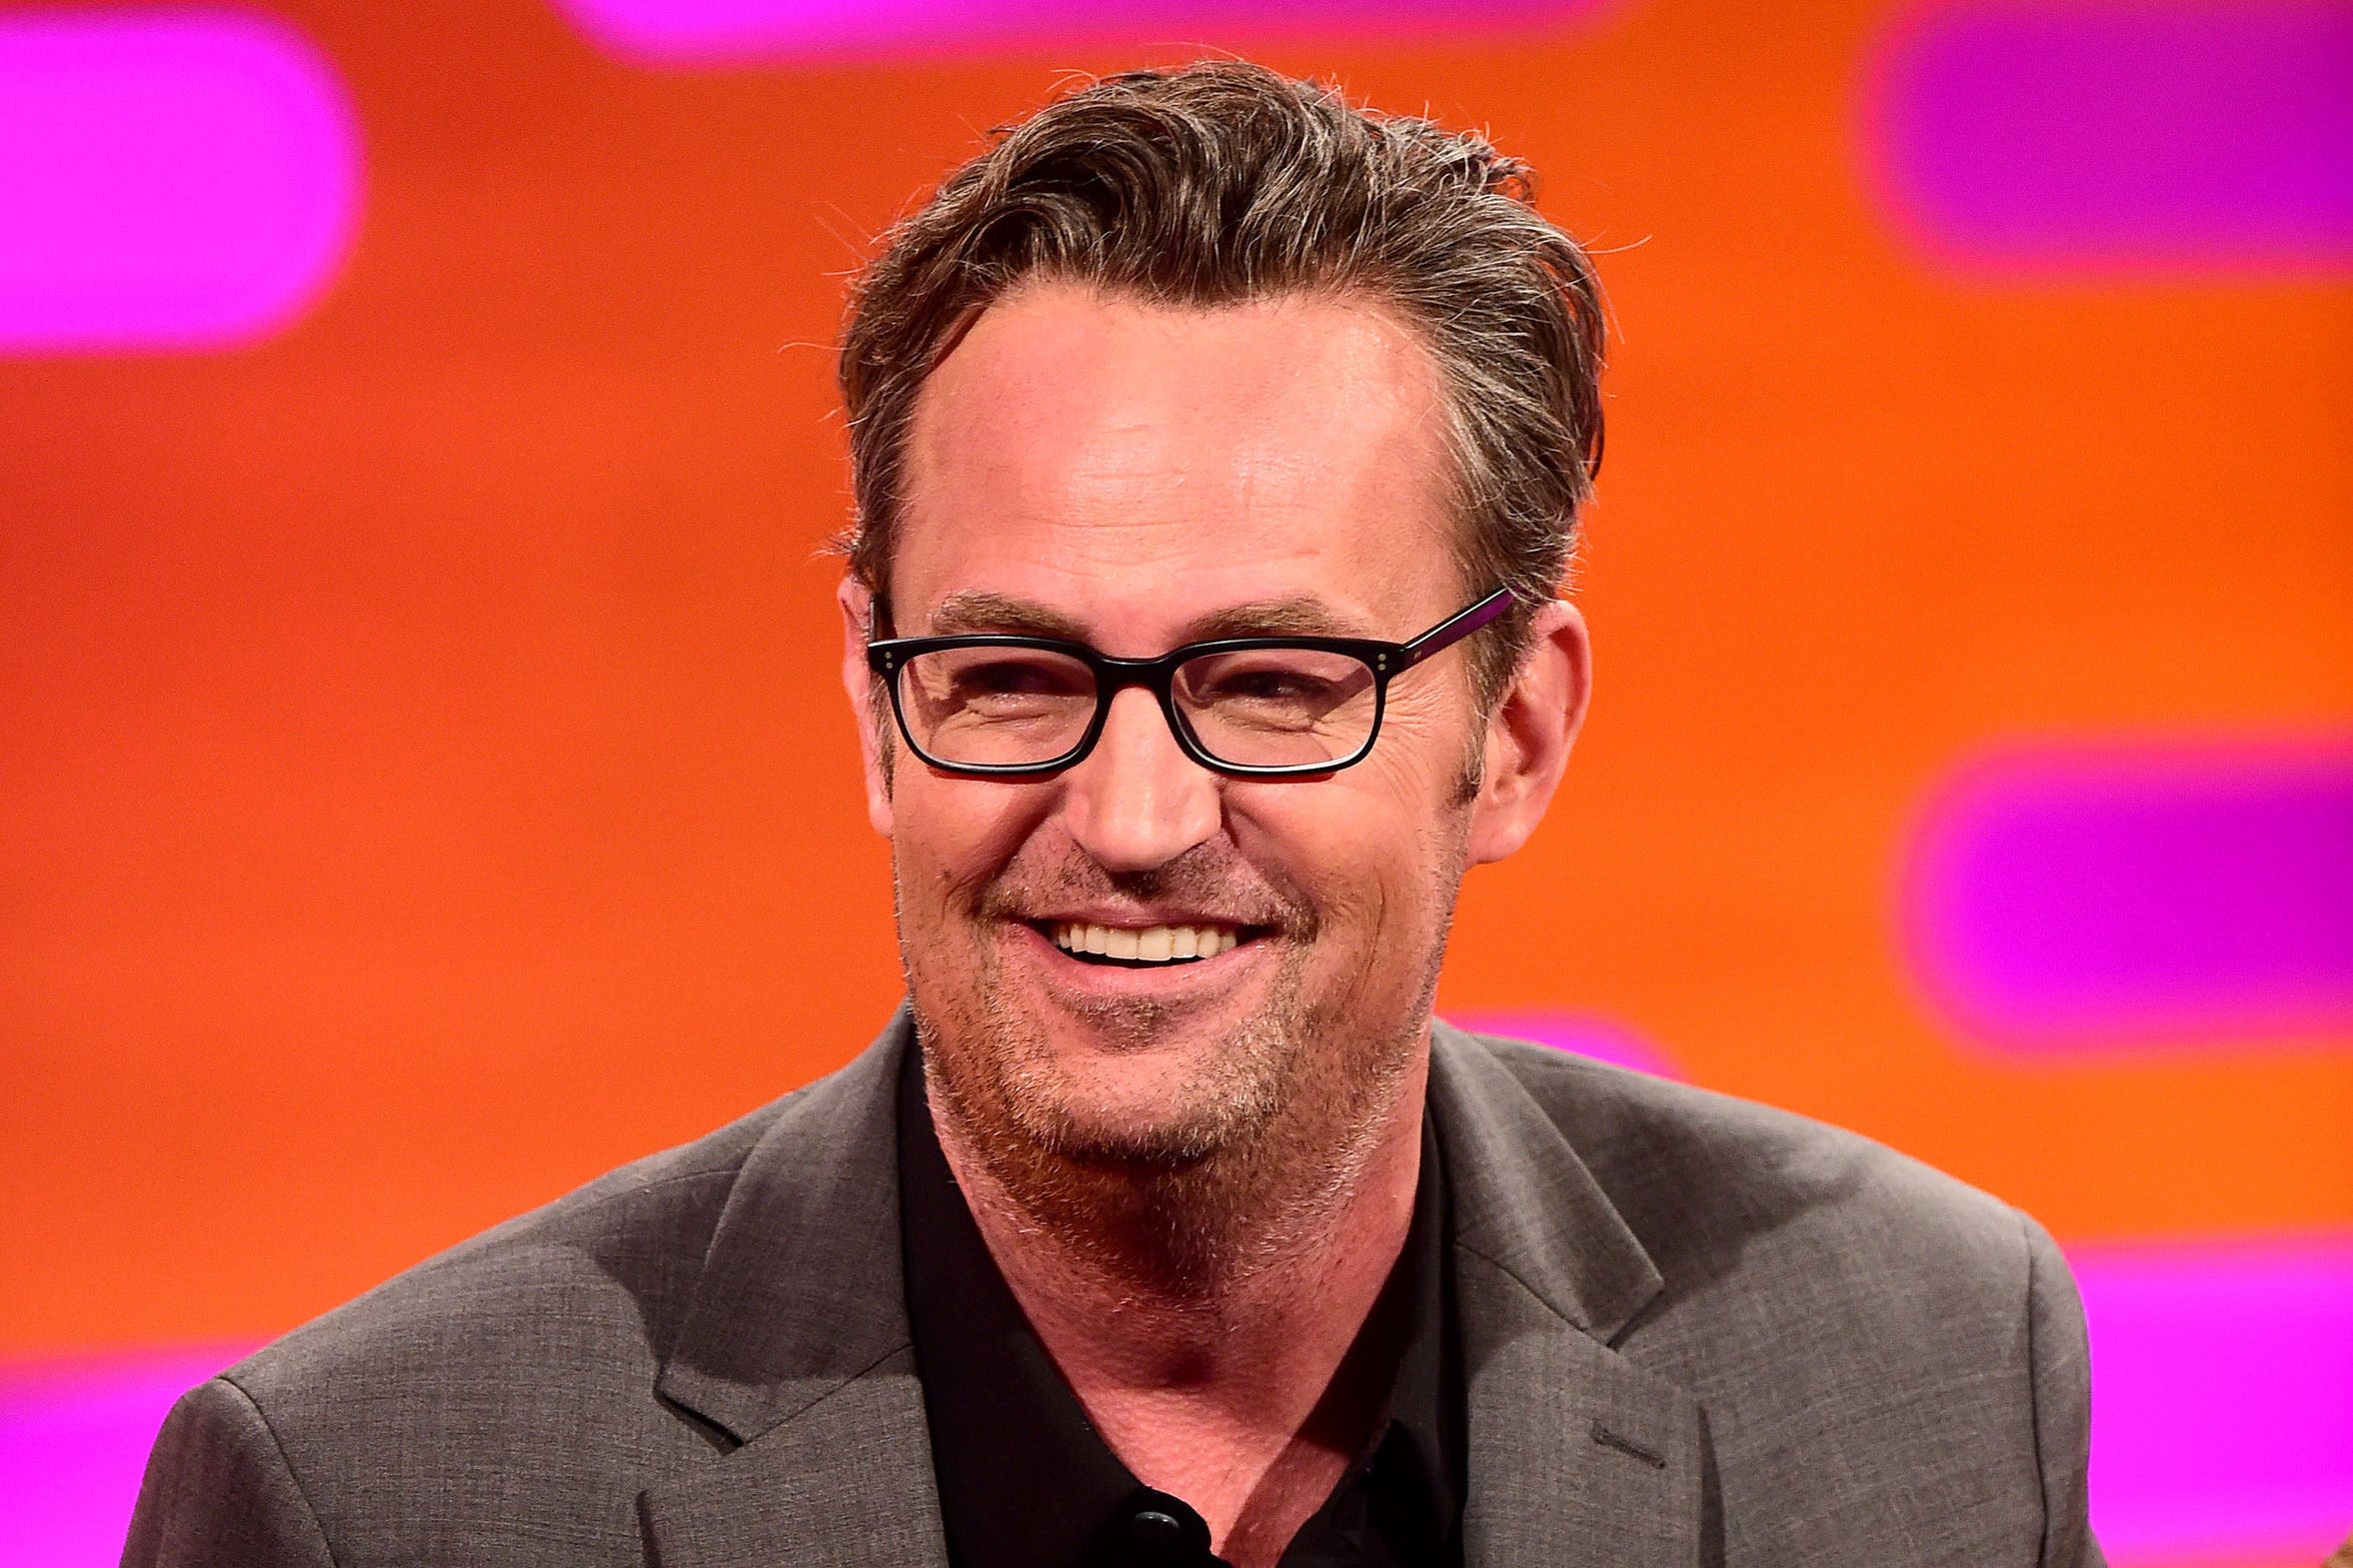 Matthew Perry played Chandler Bing in all 10 seasons of ‘Friends’ on NBC from 1994 to 2004